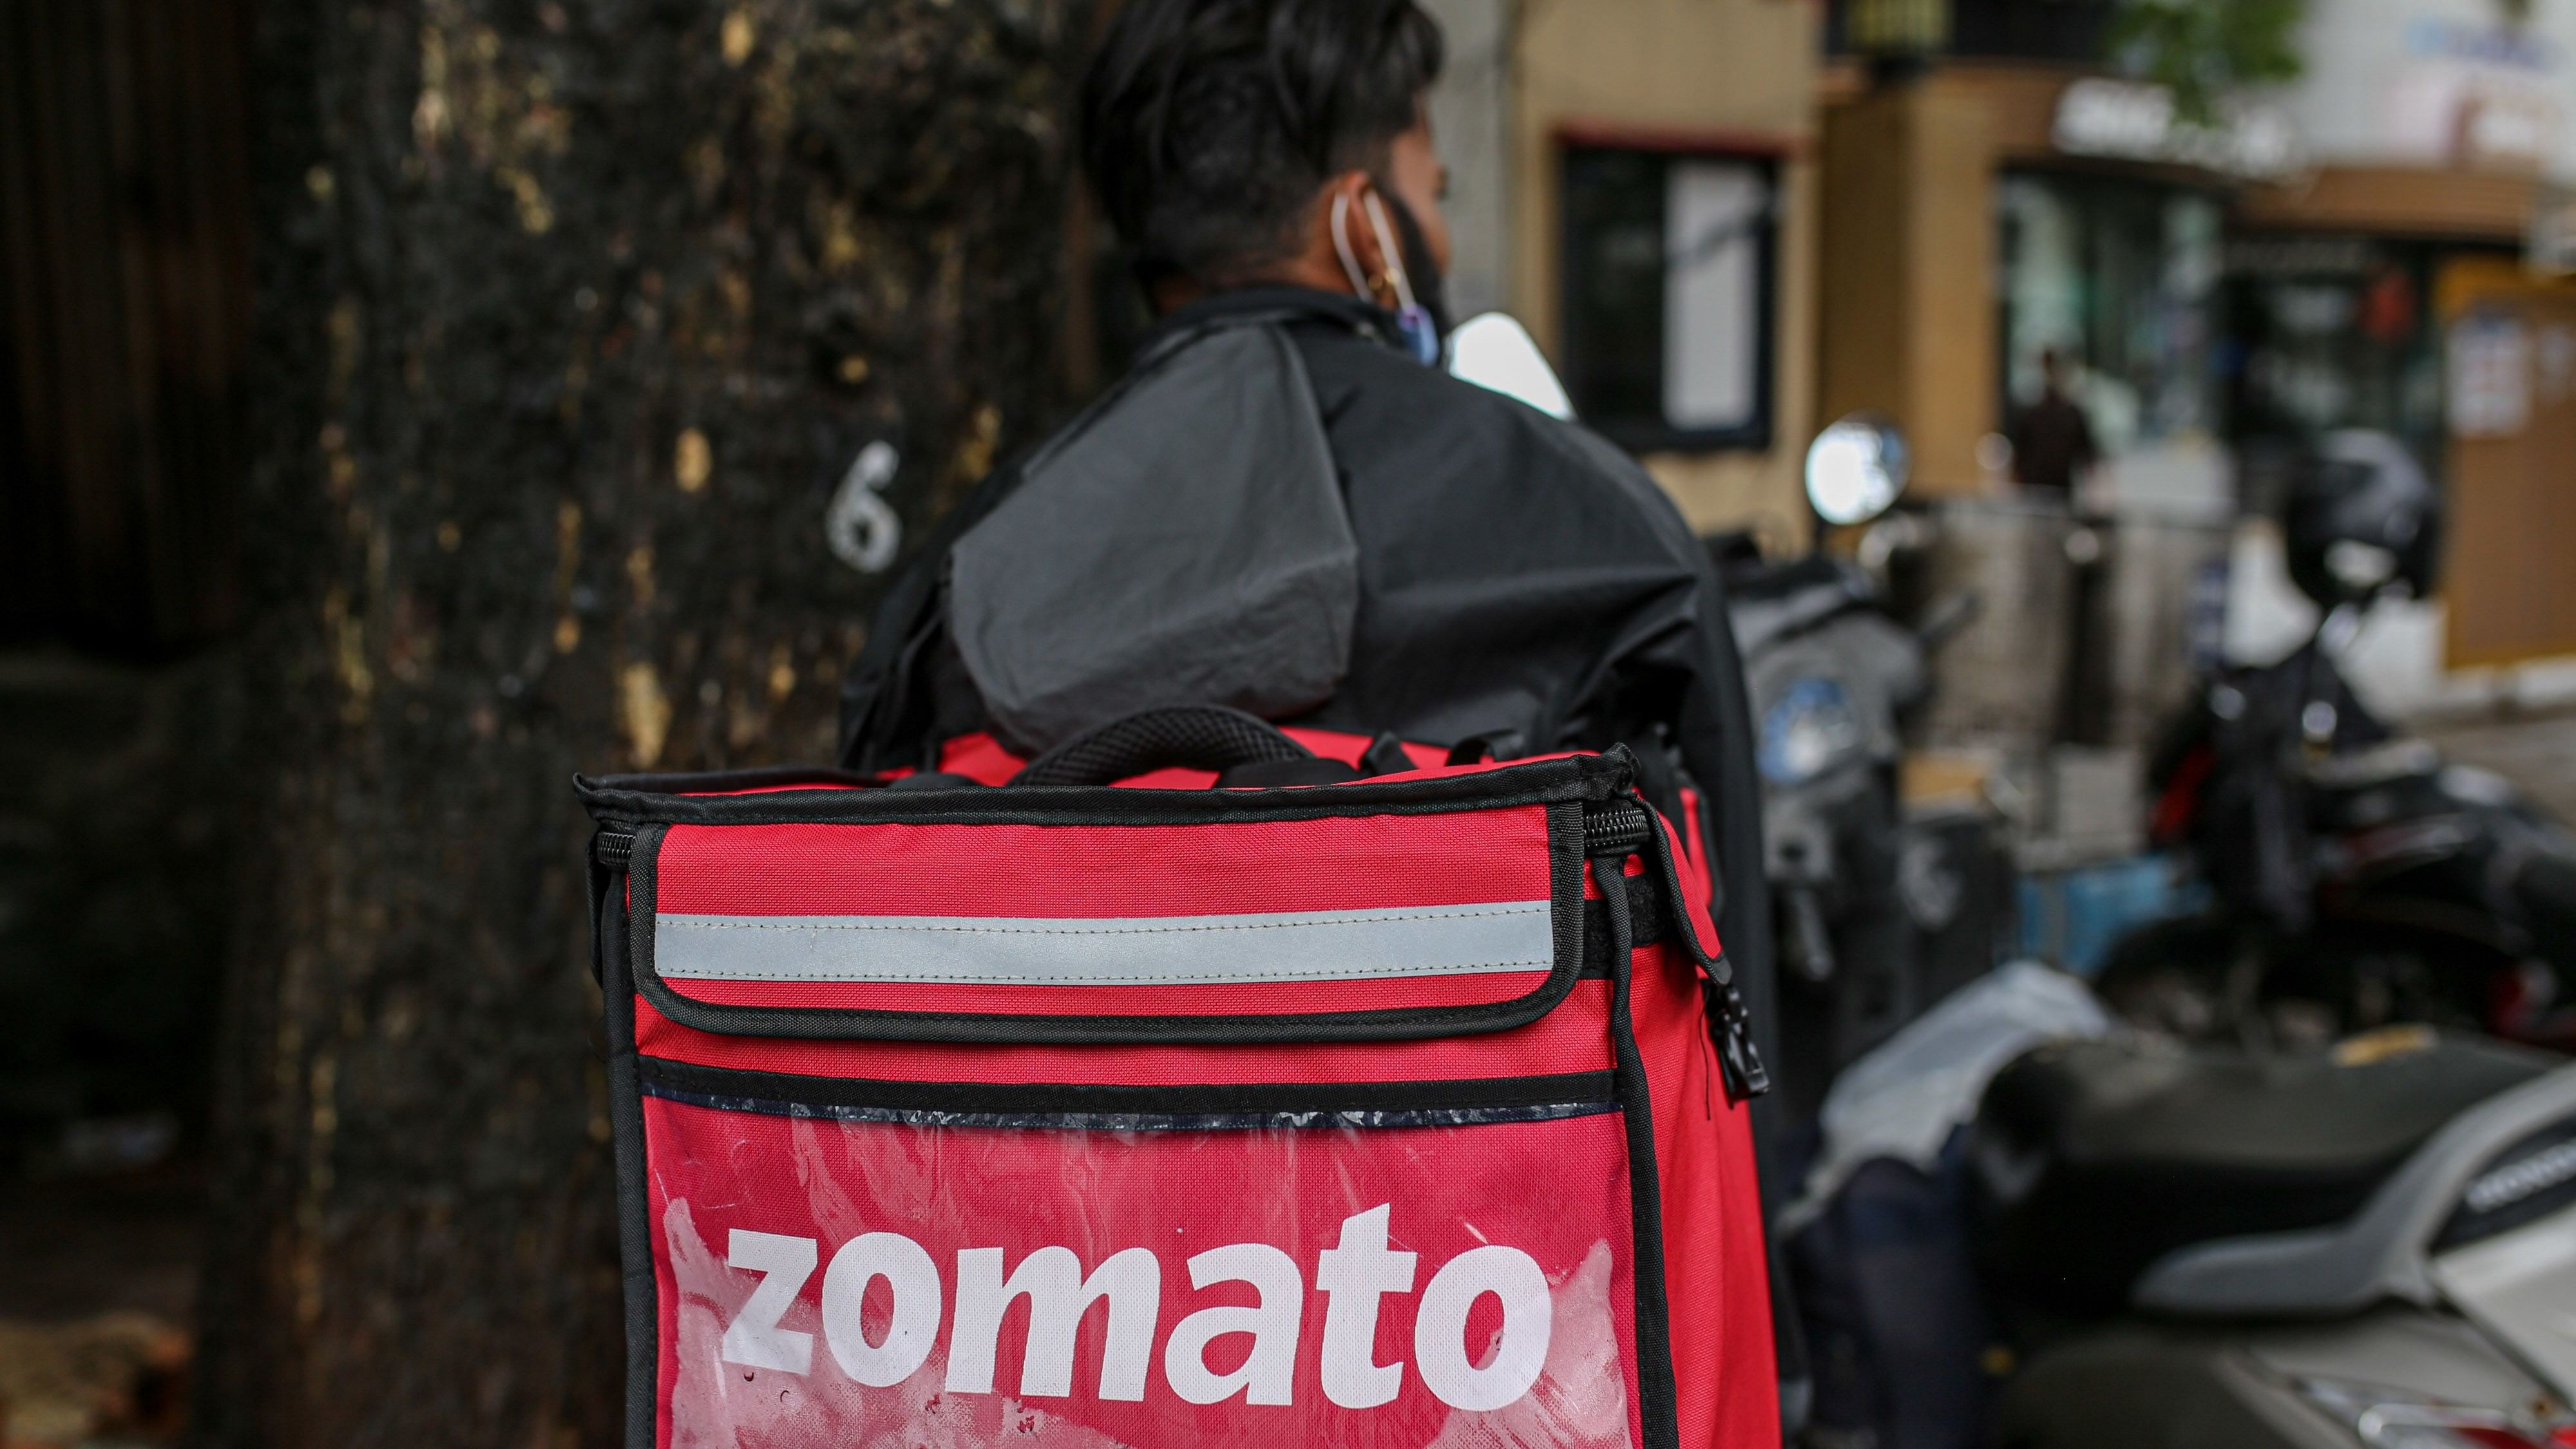 Goldendays Zomato Food Delivery Bag - Get Best Price from Manufacturers &  Suppliers in India